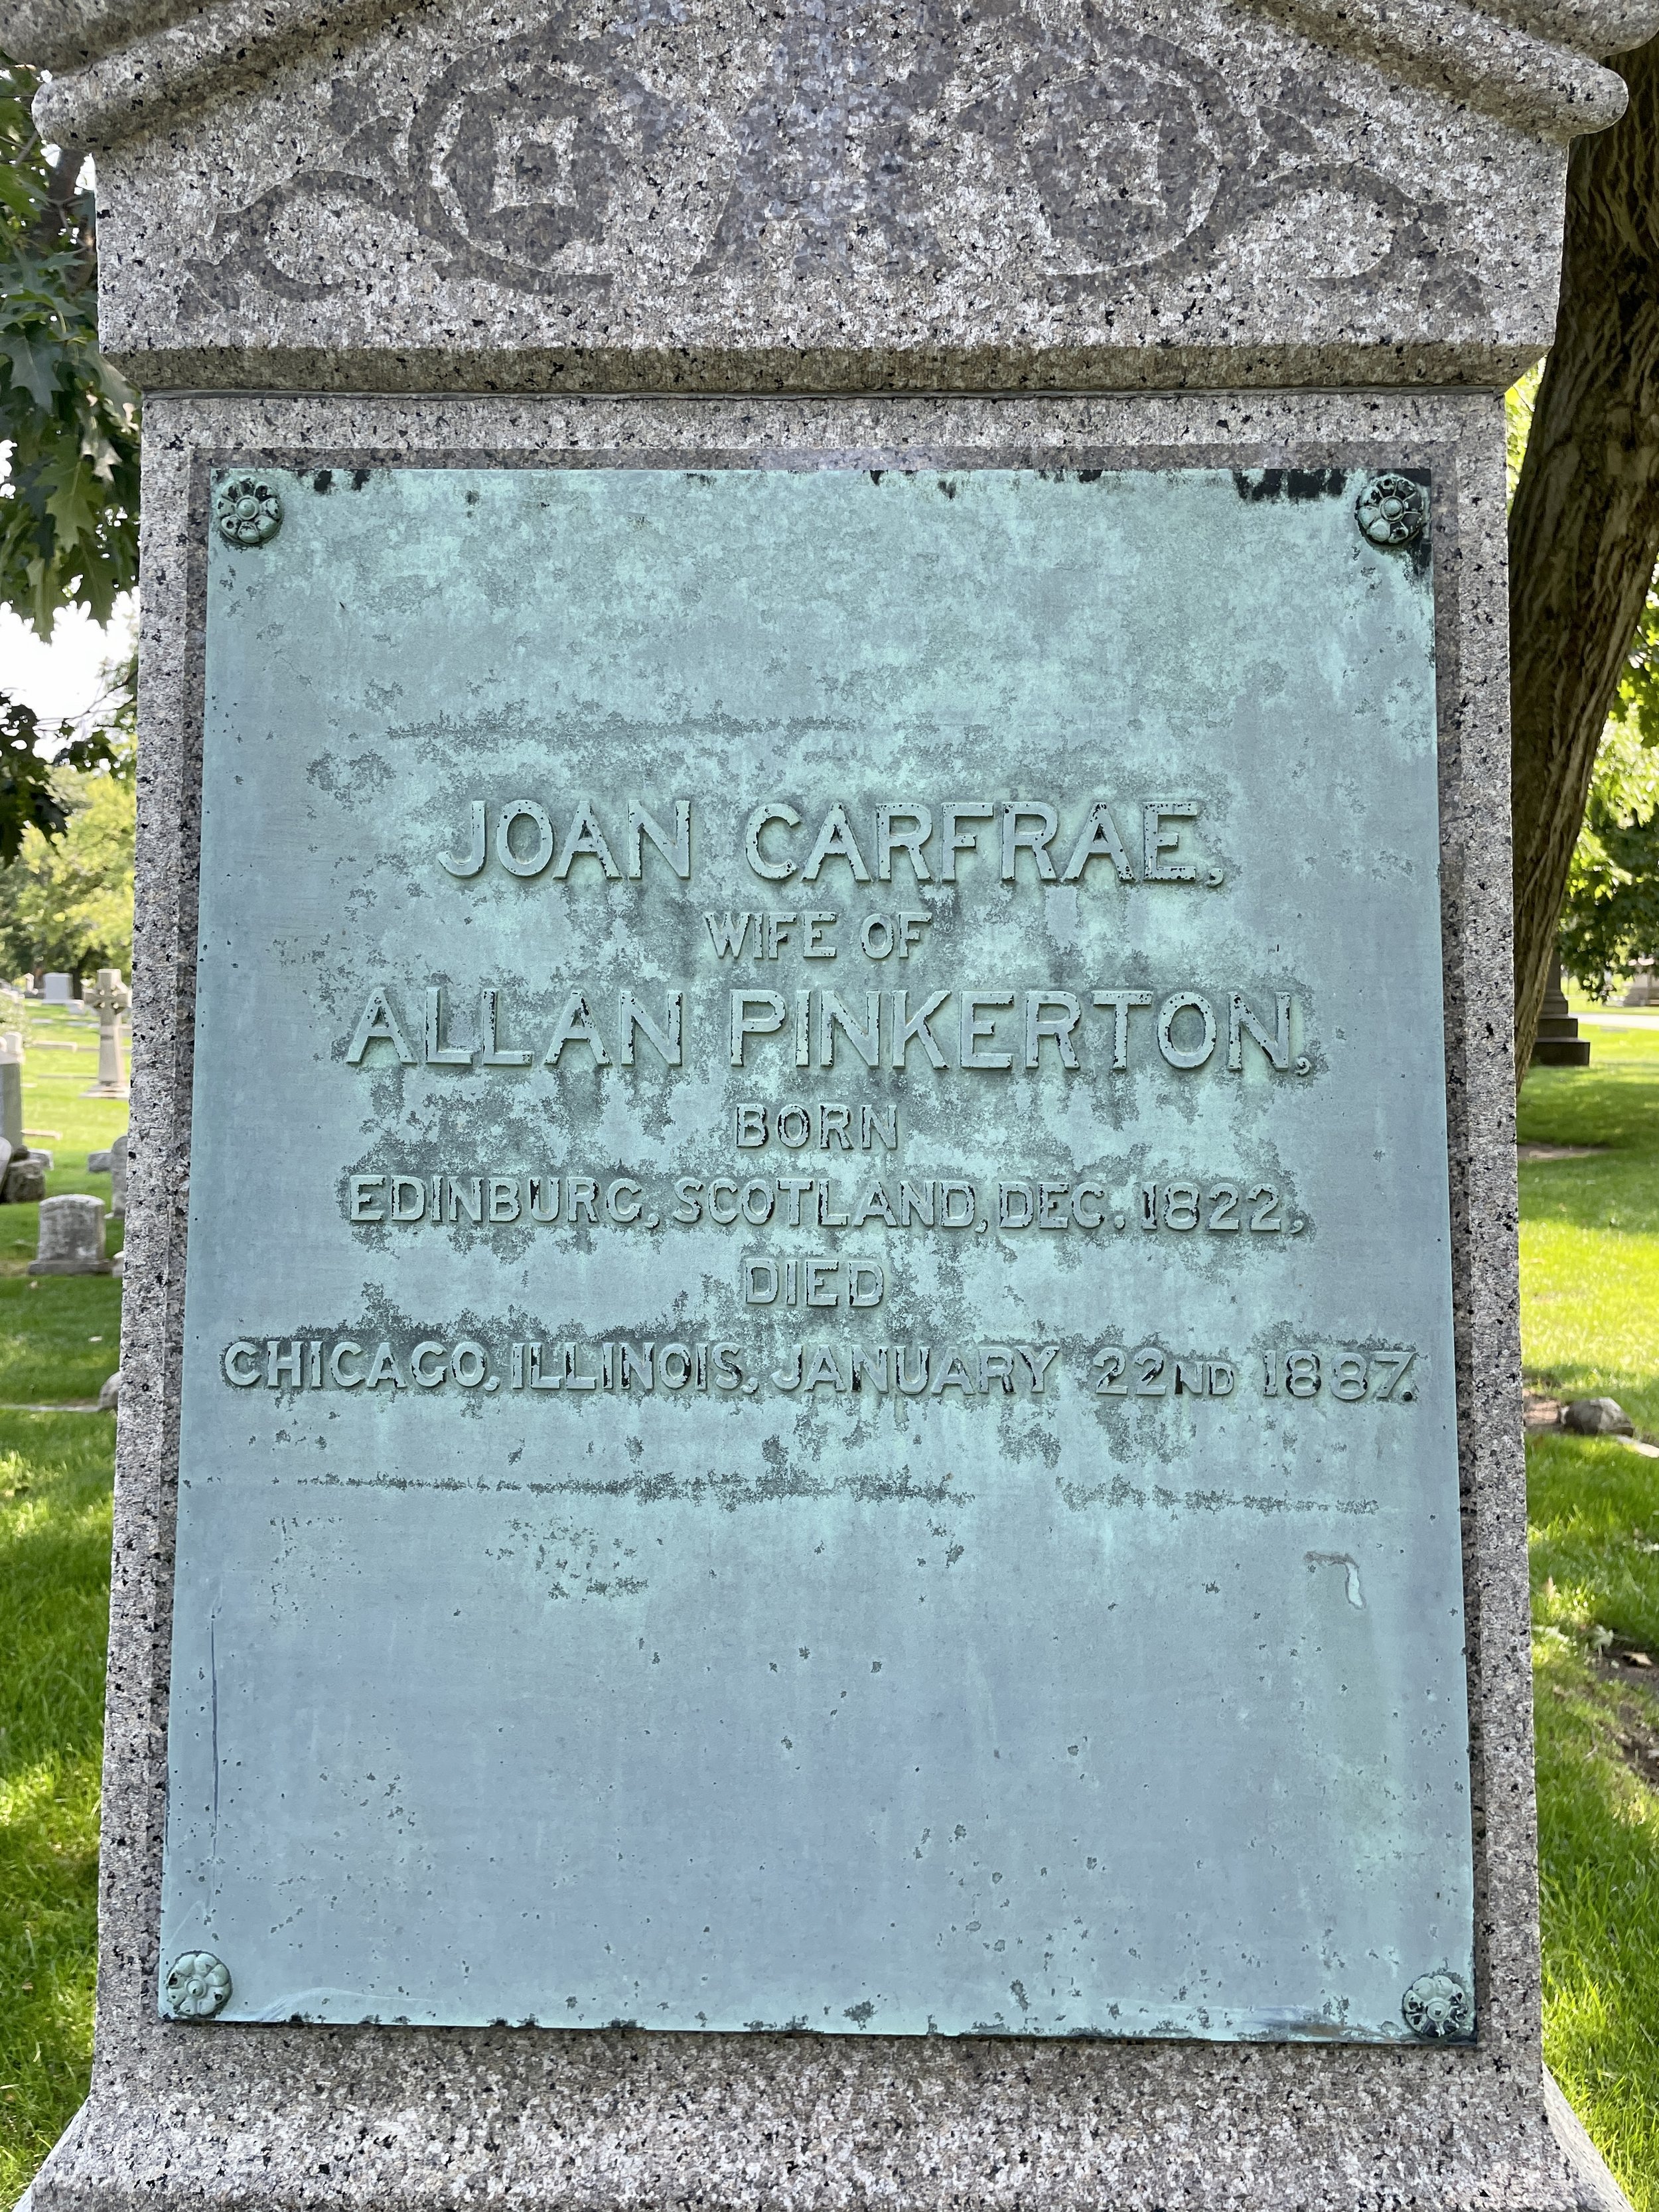 Tablet for Joan Carfrae, Pinkerton's wife.